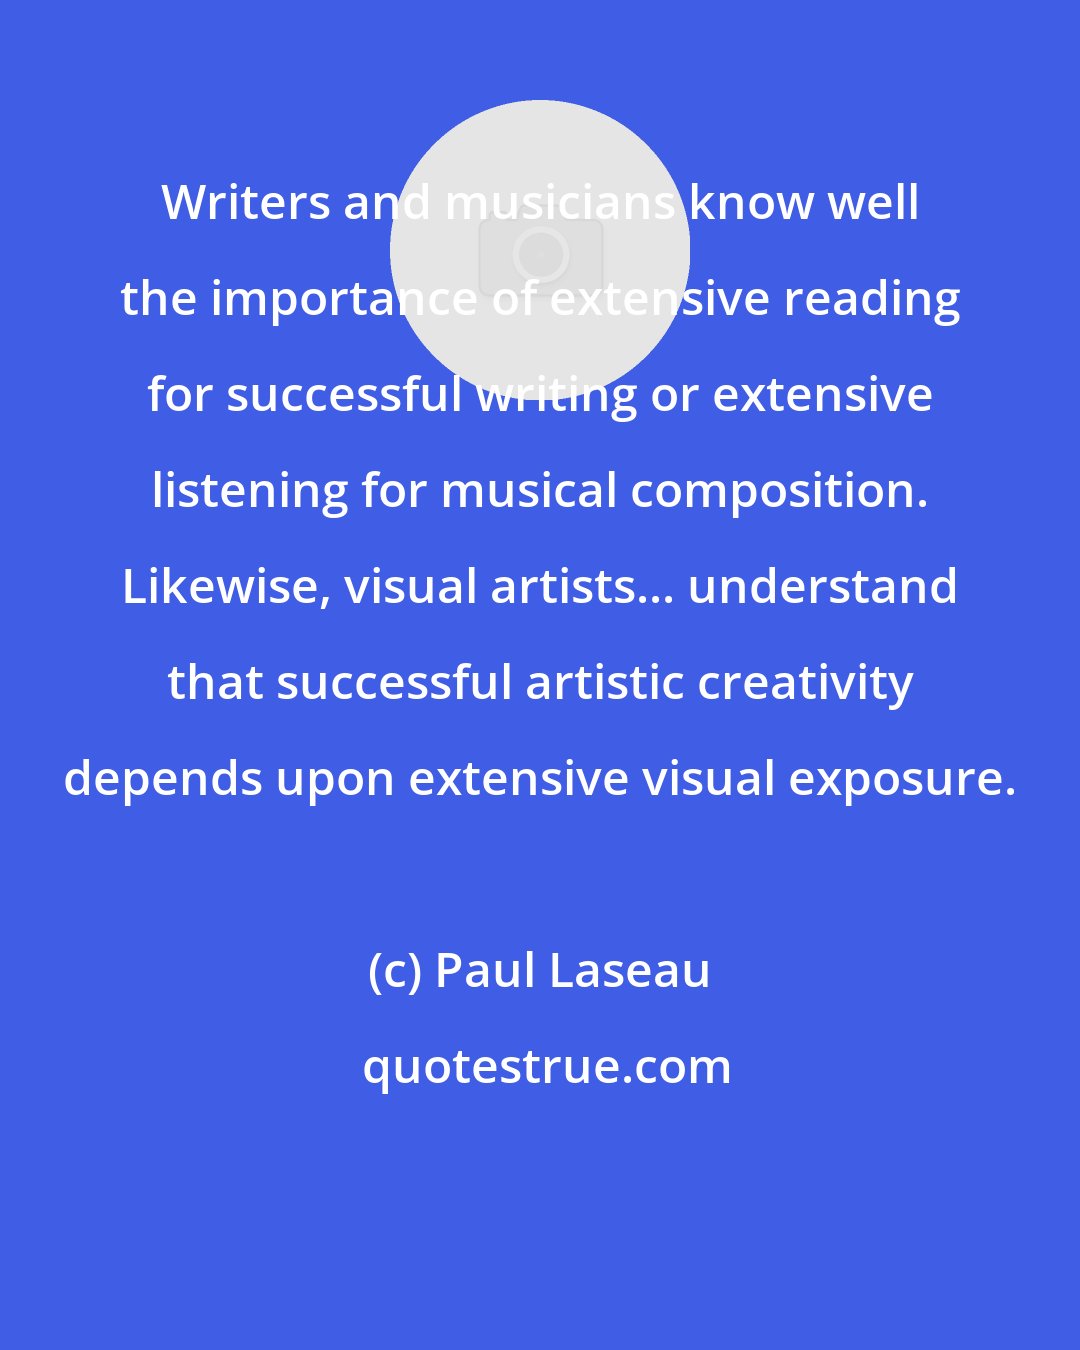 Paul Laseau: Writers and musicians know well the importance of extensive reading for successful writing or extensive listening for musical composition. Likewise, visual artists... understand that successful artistic creativity depends upon extensive visual exposure.